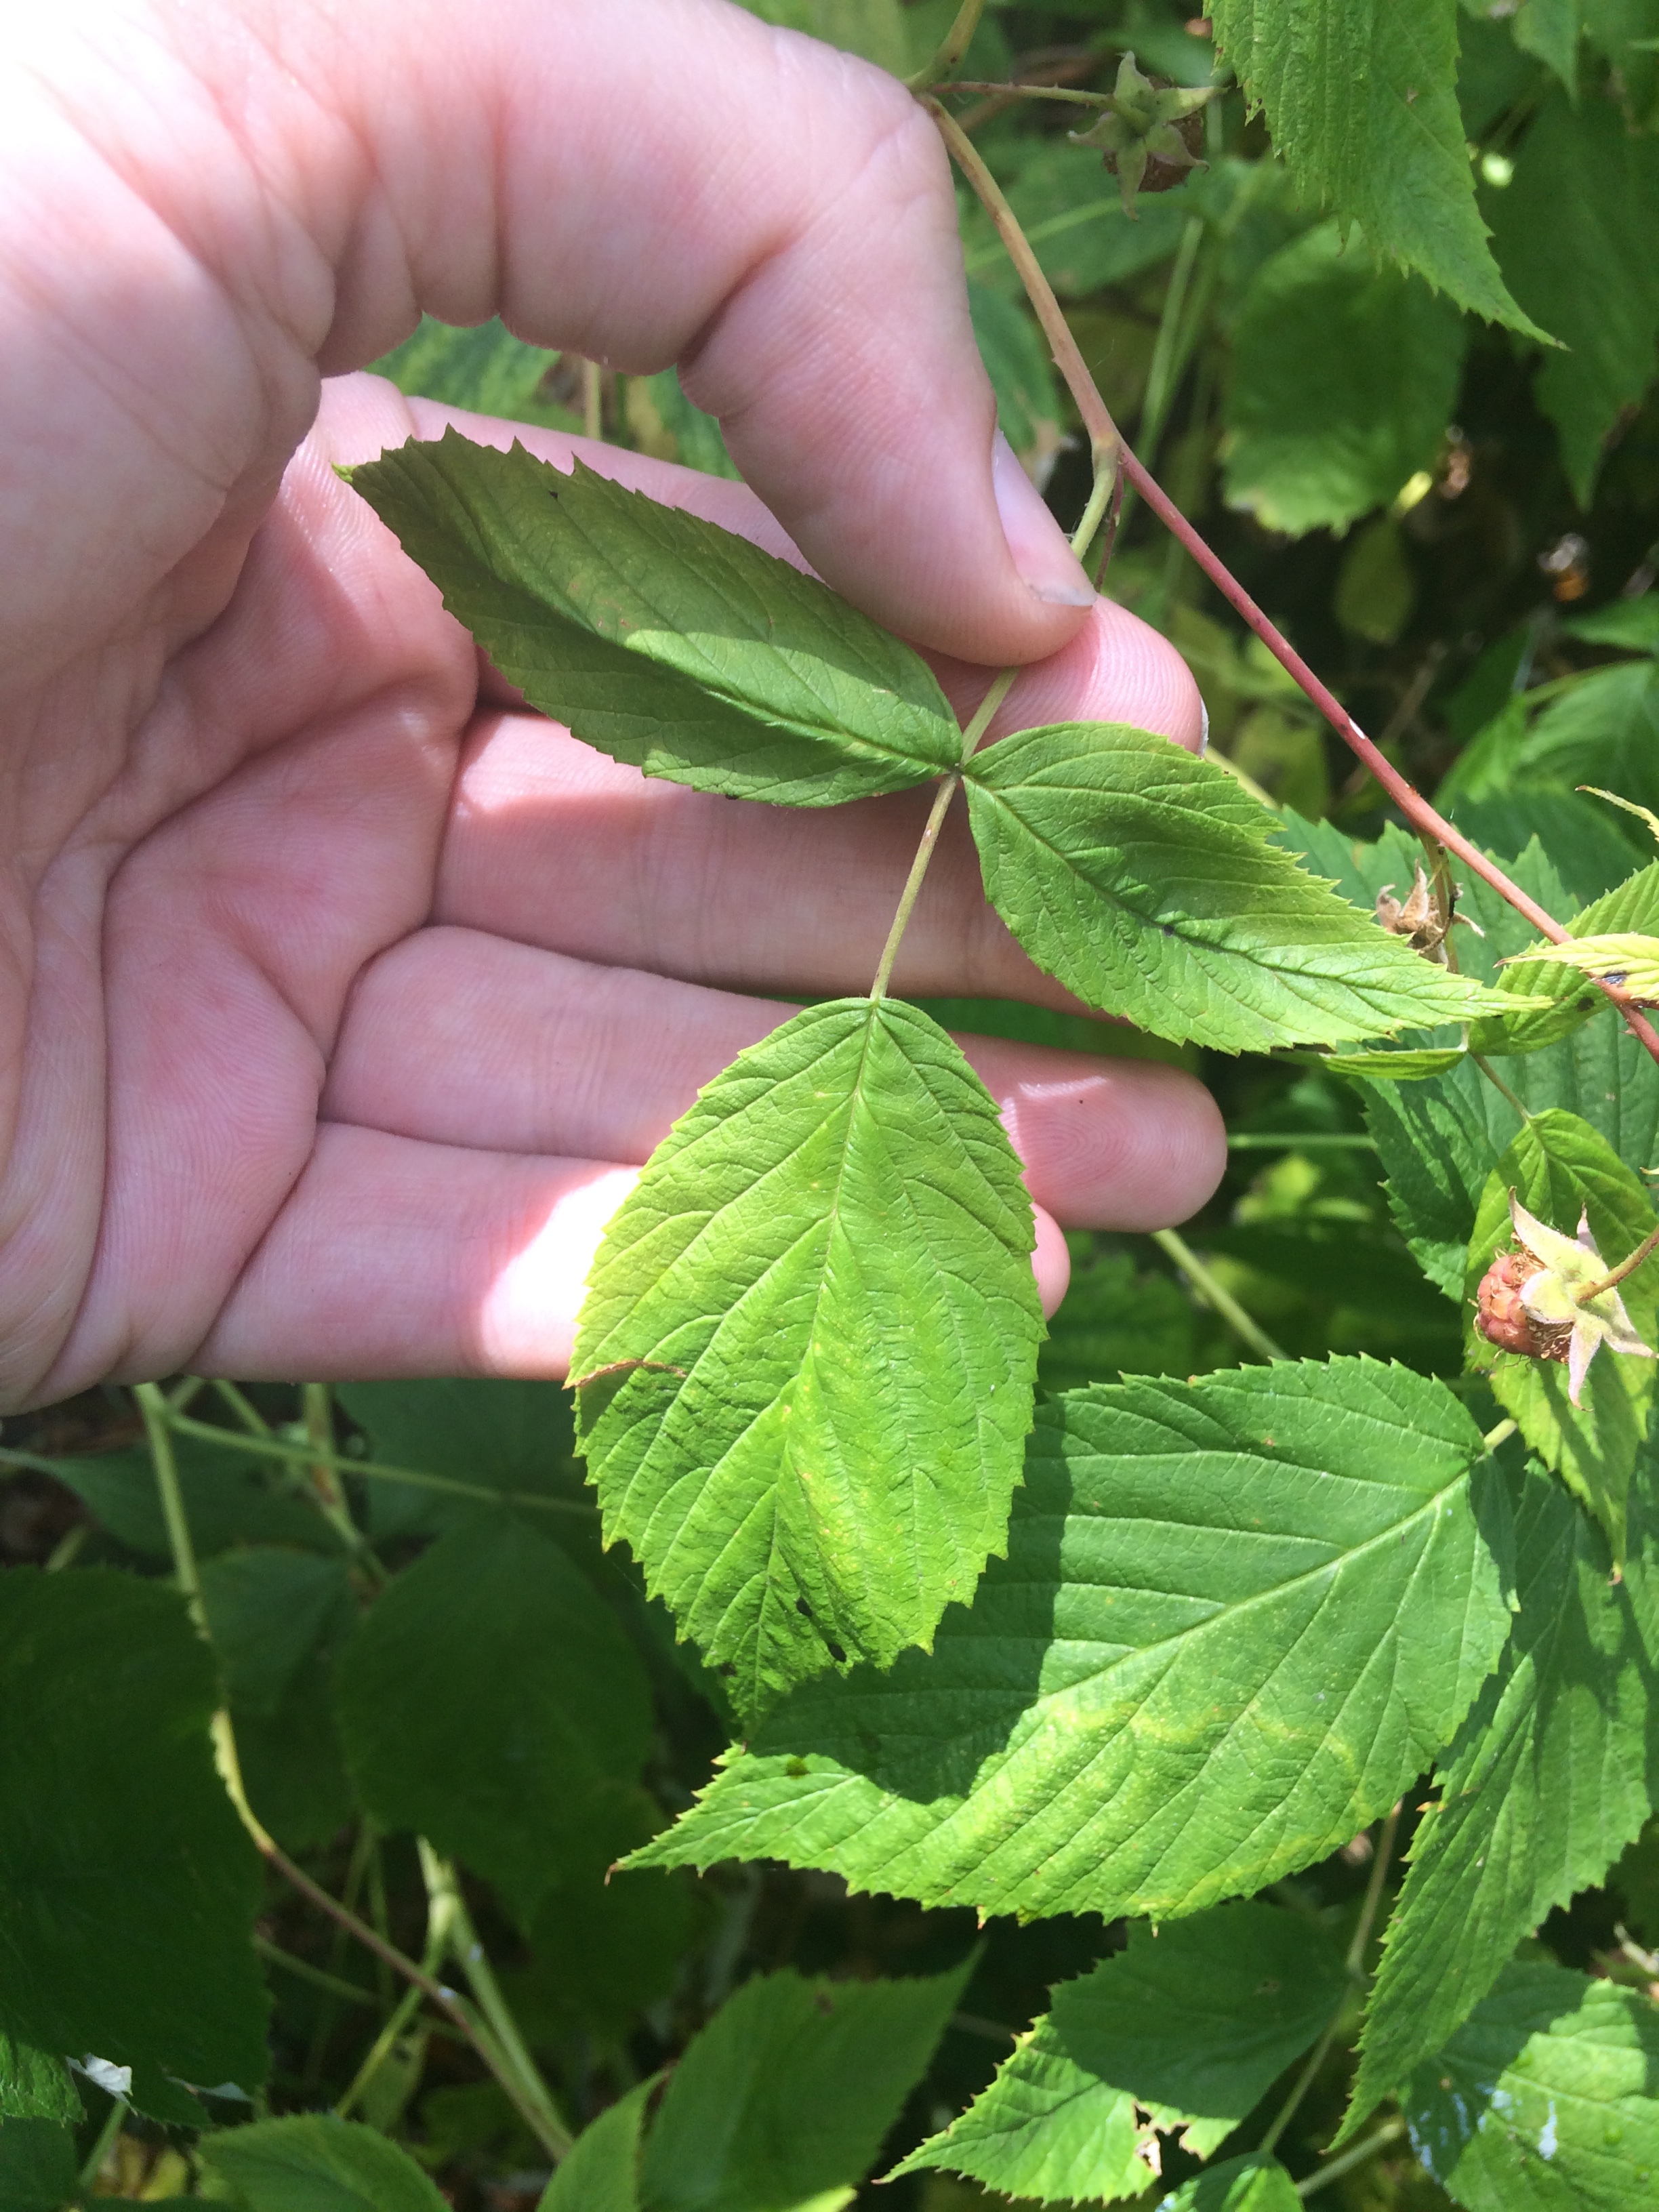 Red Raspberry Leaf with Three Leaflets